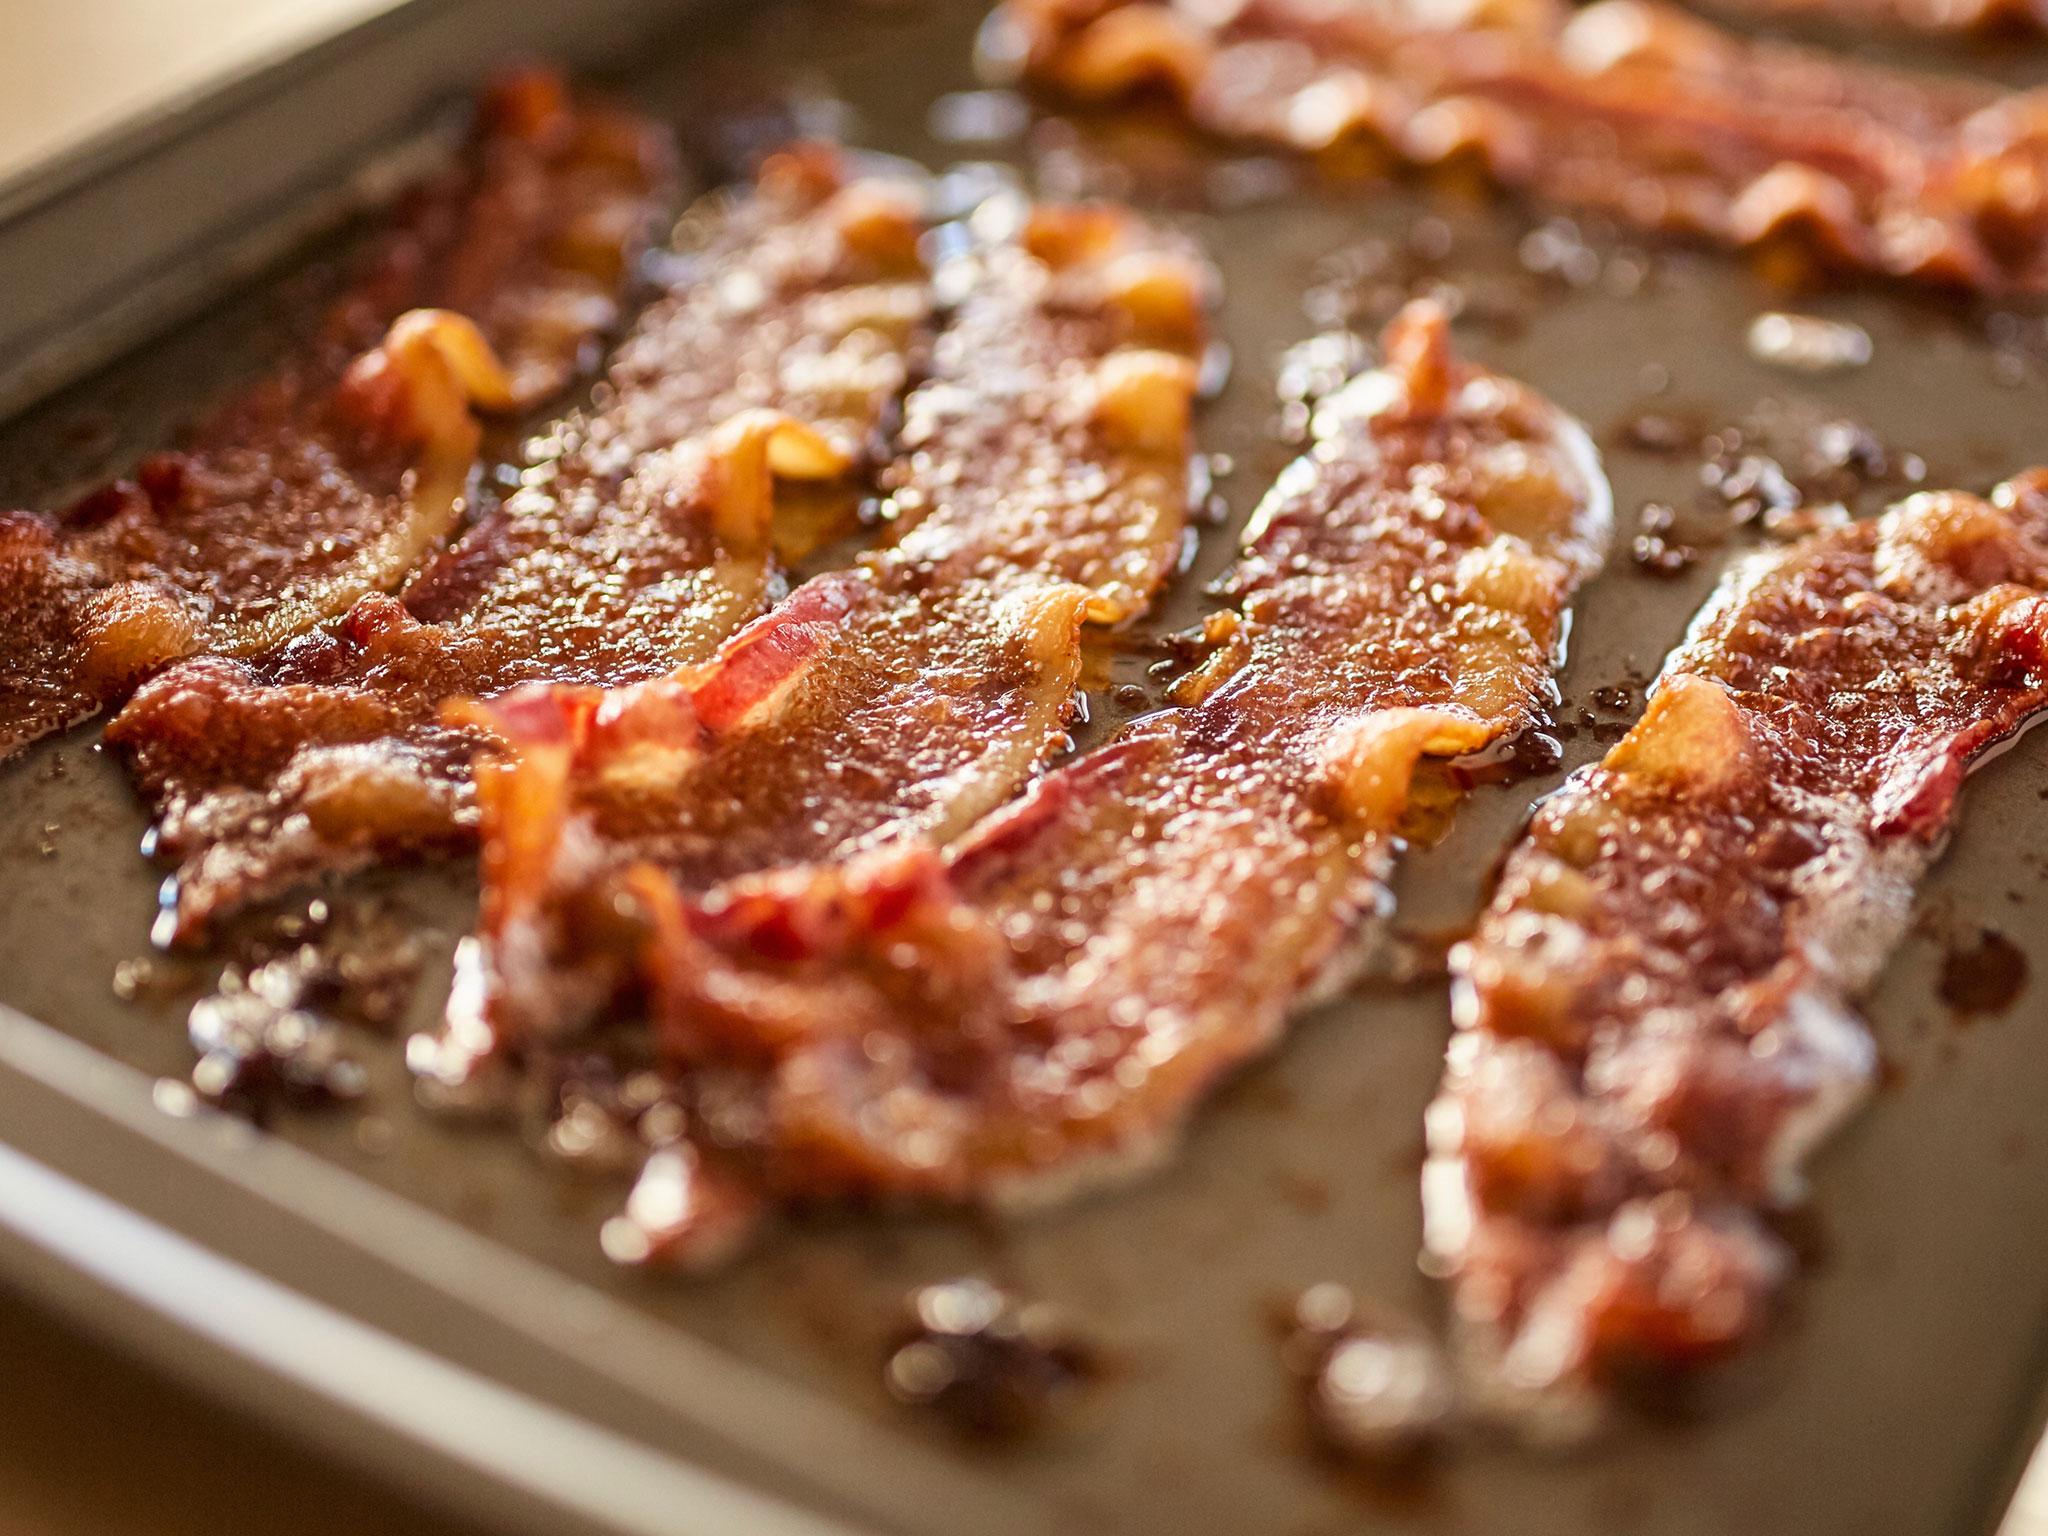 Cured meat like bacon could worsen symptoms of asthma